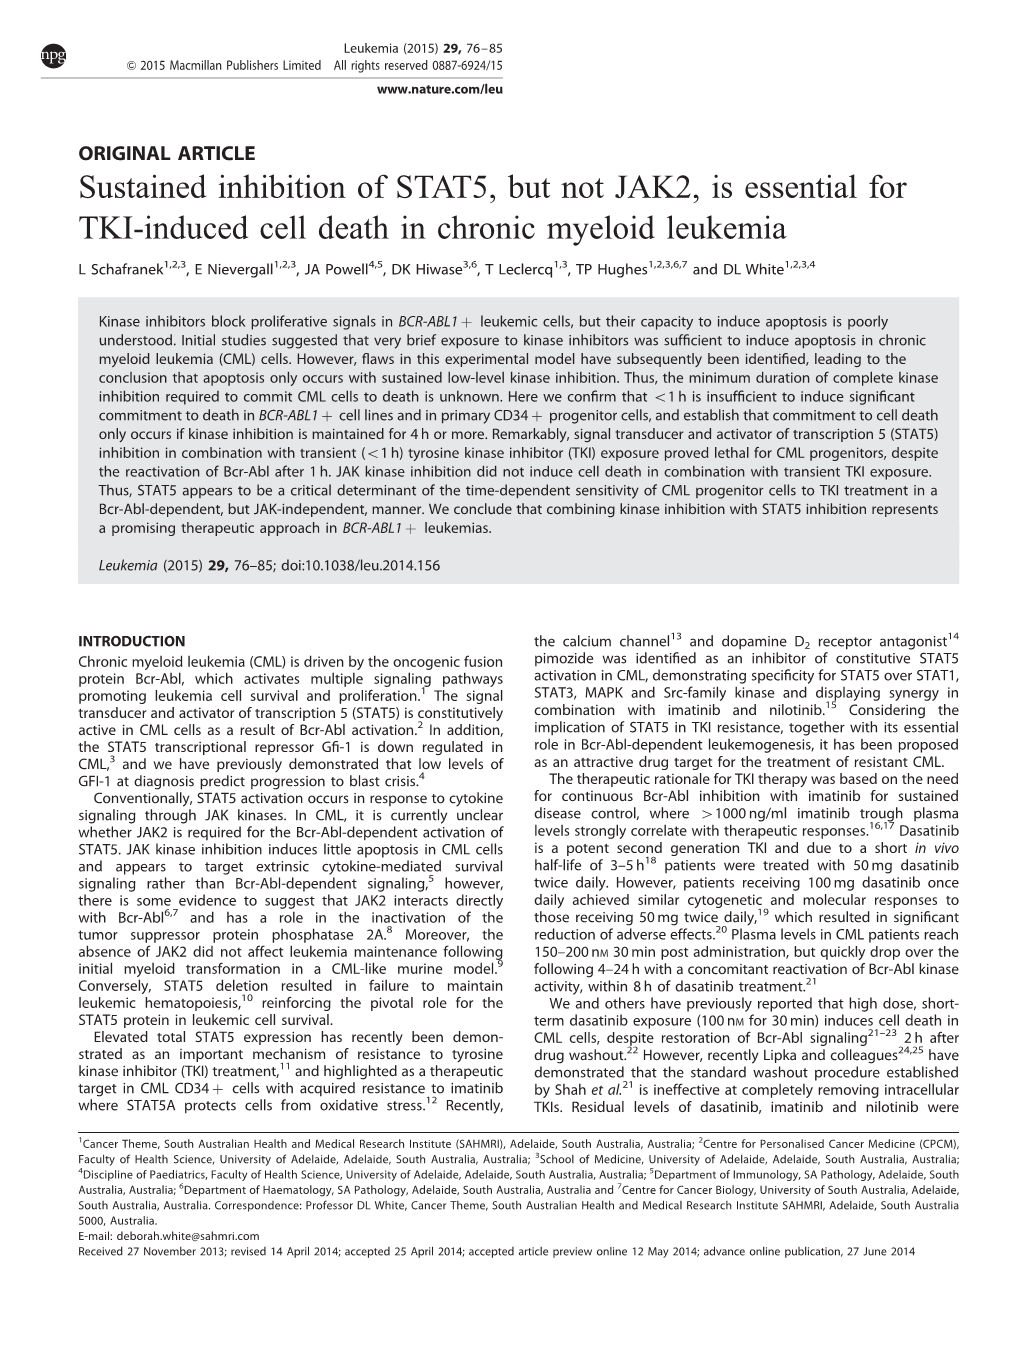 Sustained Inhibition of STAT5, but Not JAK2, Is Essential for TKI-Induced Cell Death in Chronic Myeloid Leukemia